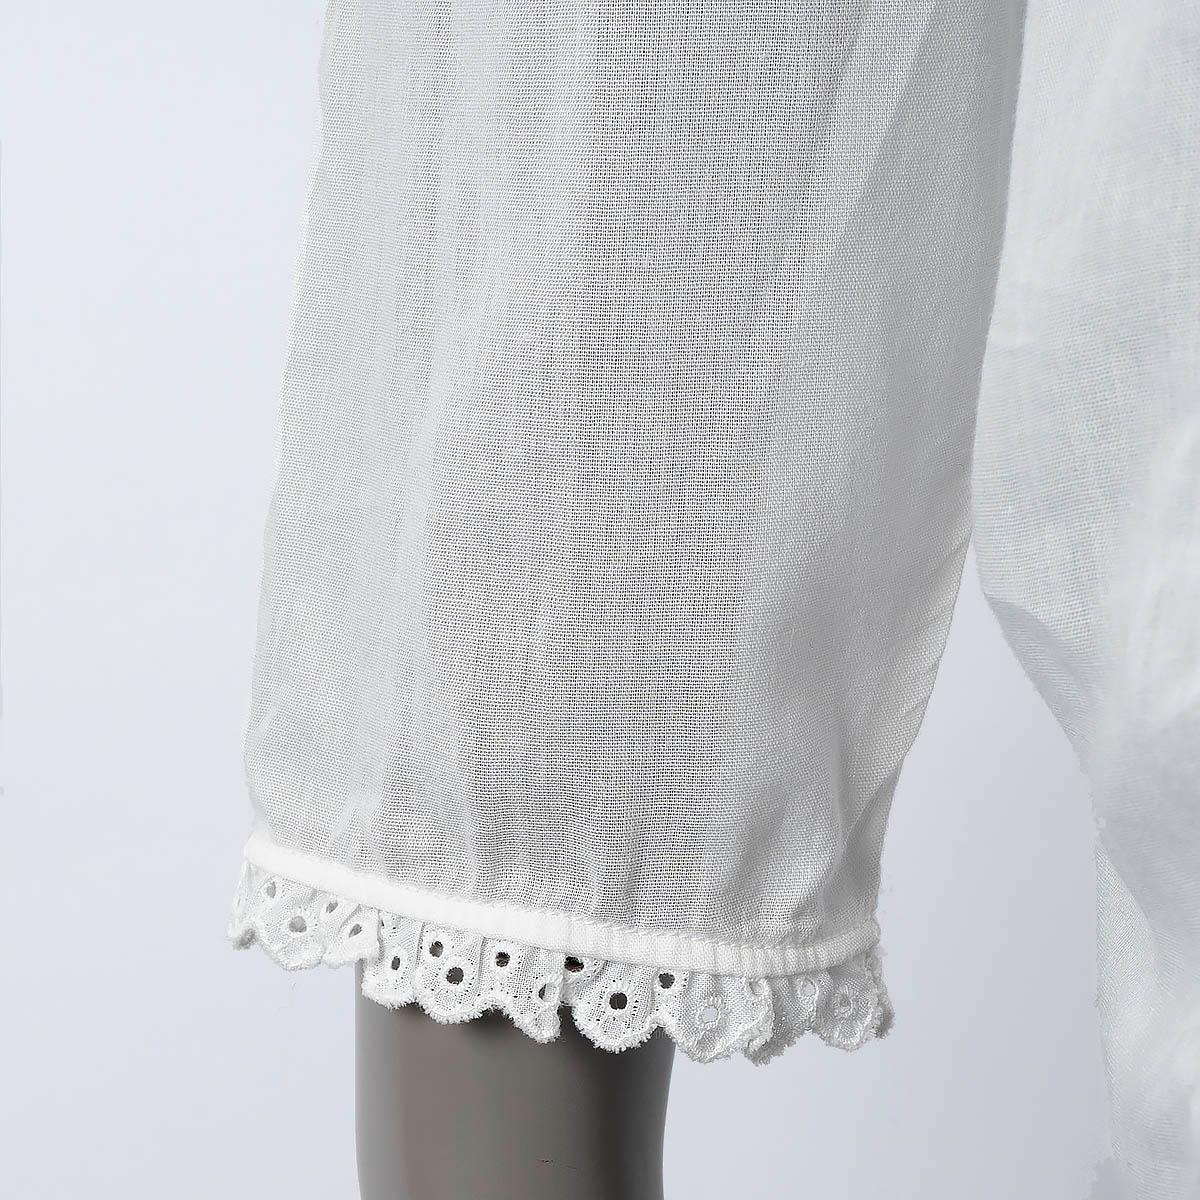 SAINT LAURENT white cotton 2015 BRODERIE ANGLAISE SHEER Blouse Shirt 36 XS For Sale 2